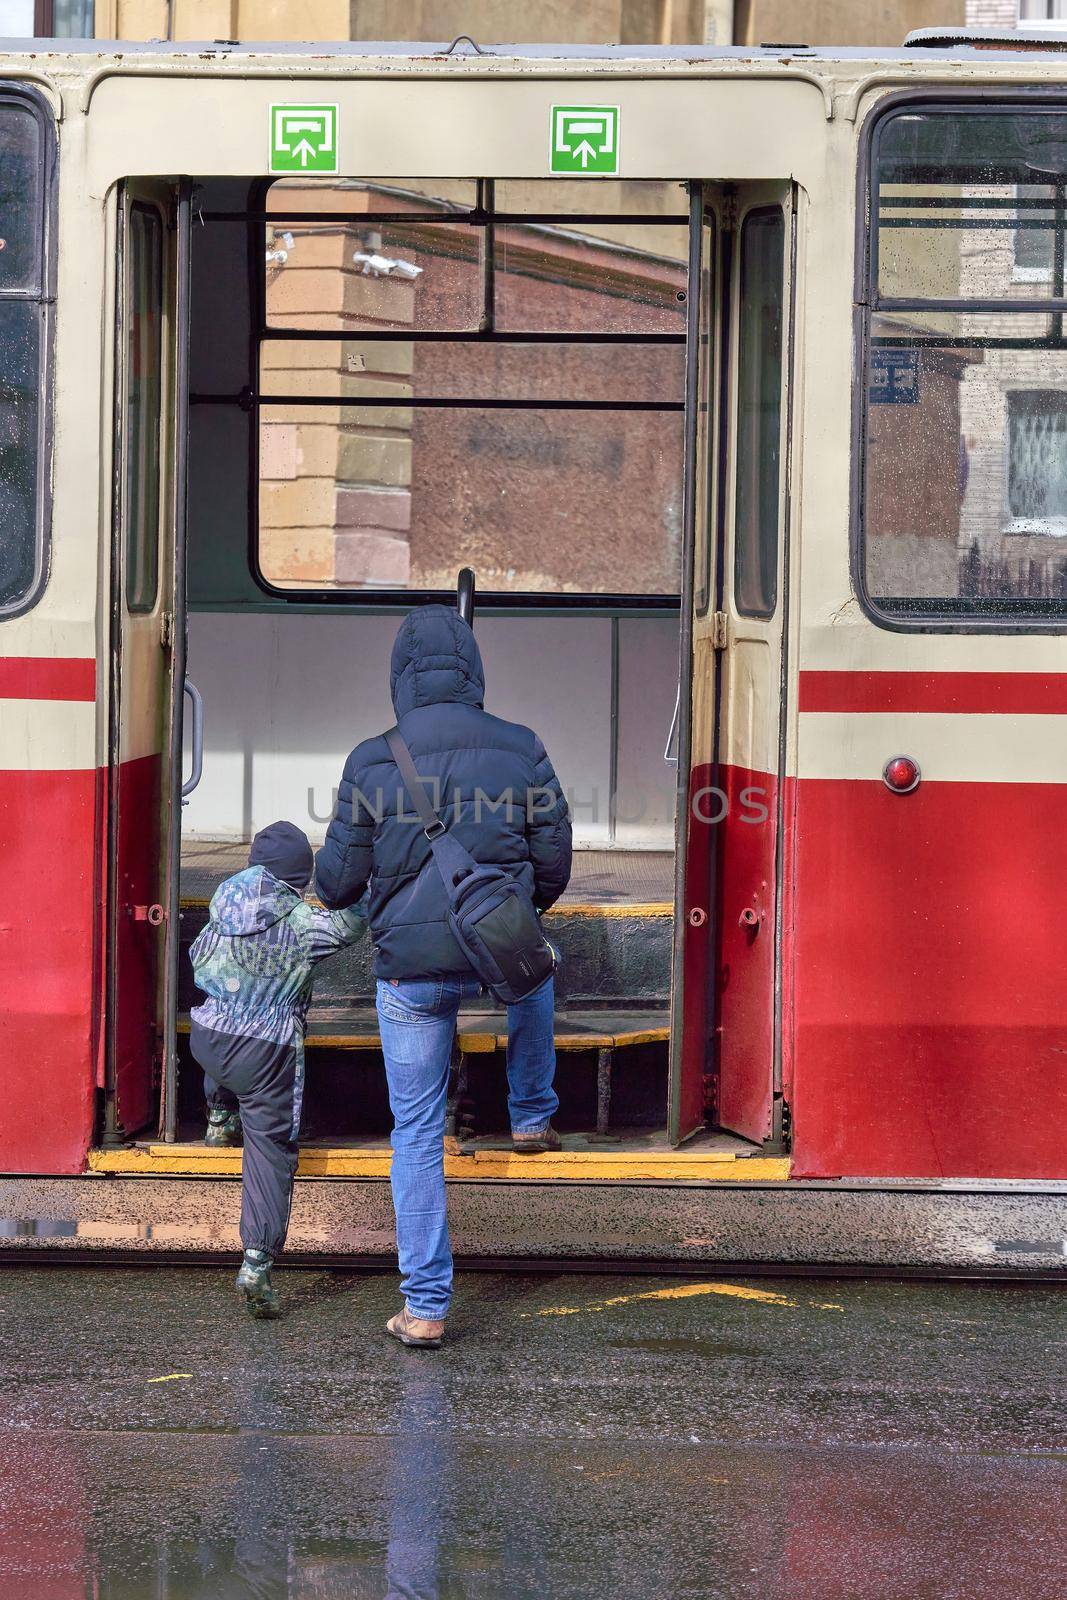 A man and a child walk through the open doors of public transport in the city by vizland